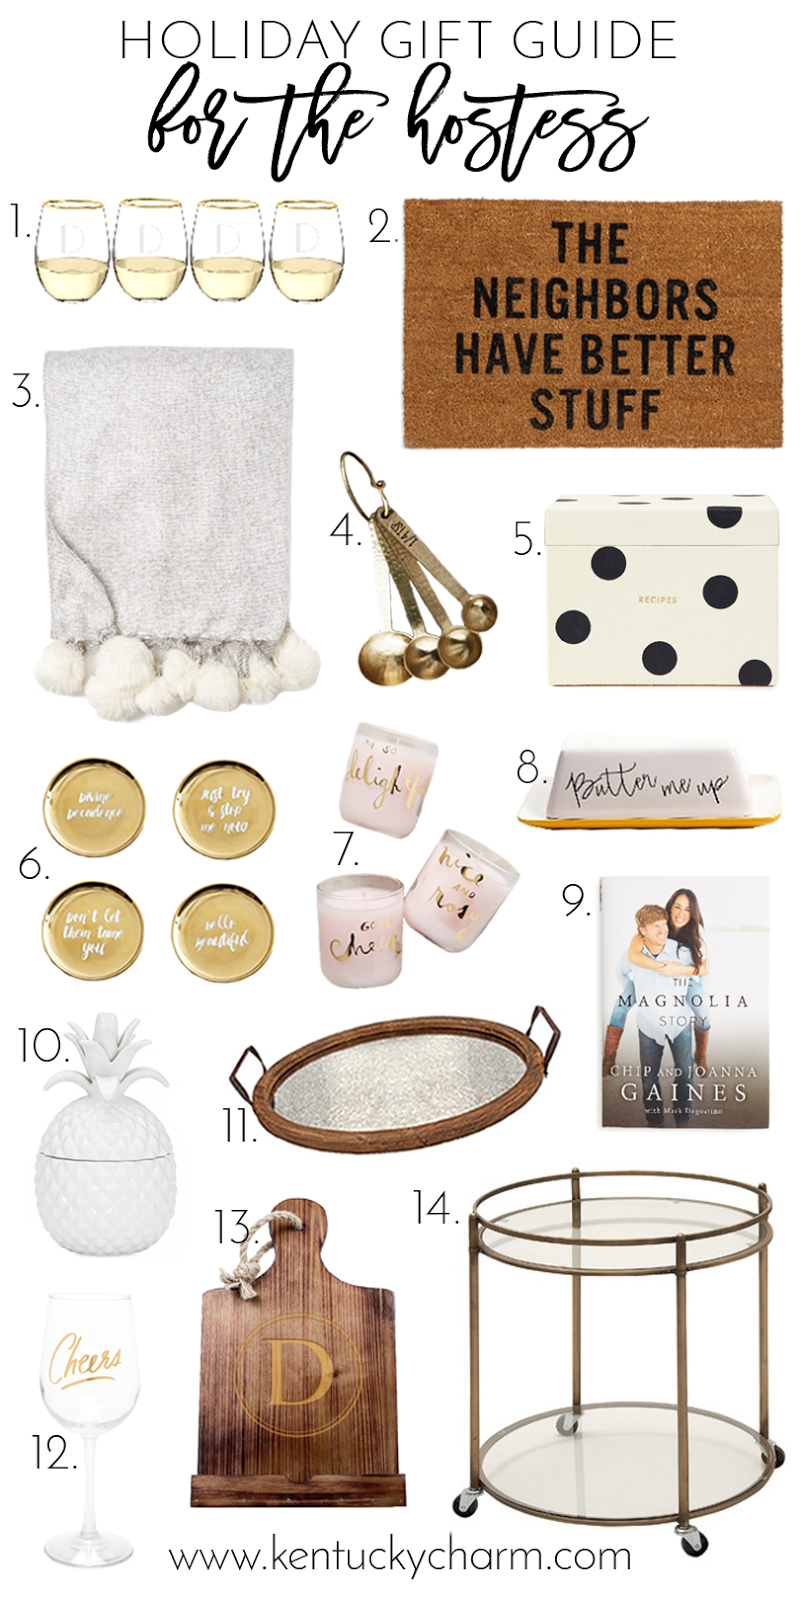 2016 Holiday Gift Guide // For The Hostess // Kentucky Charm